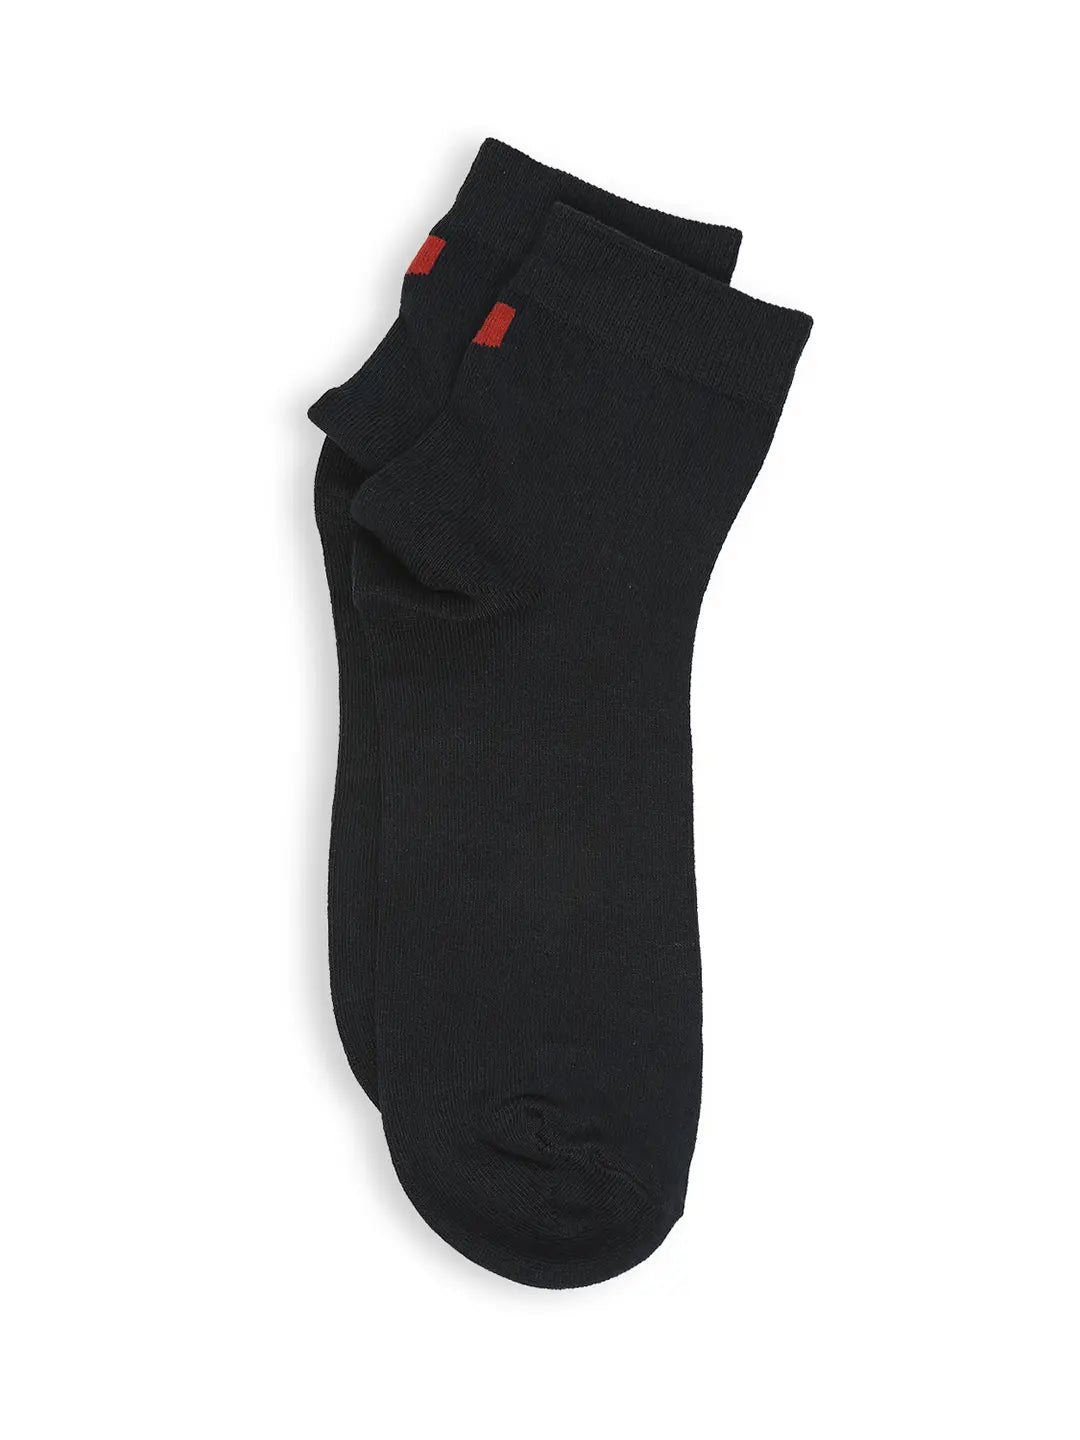 Hanes Ultimate Soft And Lightweight 6 Pair Crew Socks Womens, Color: Black  - JCPenney